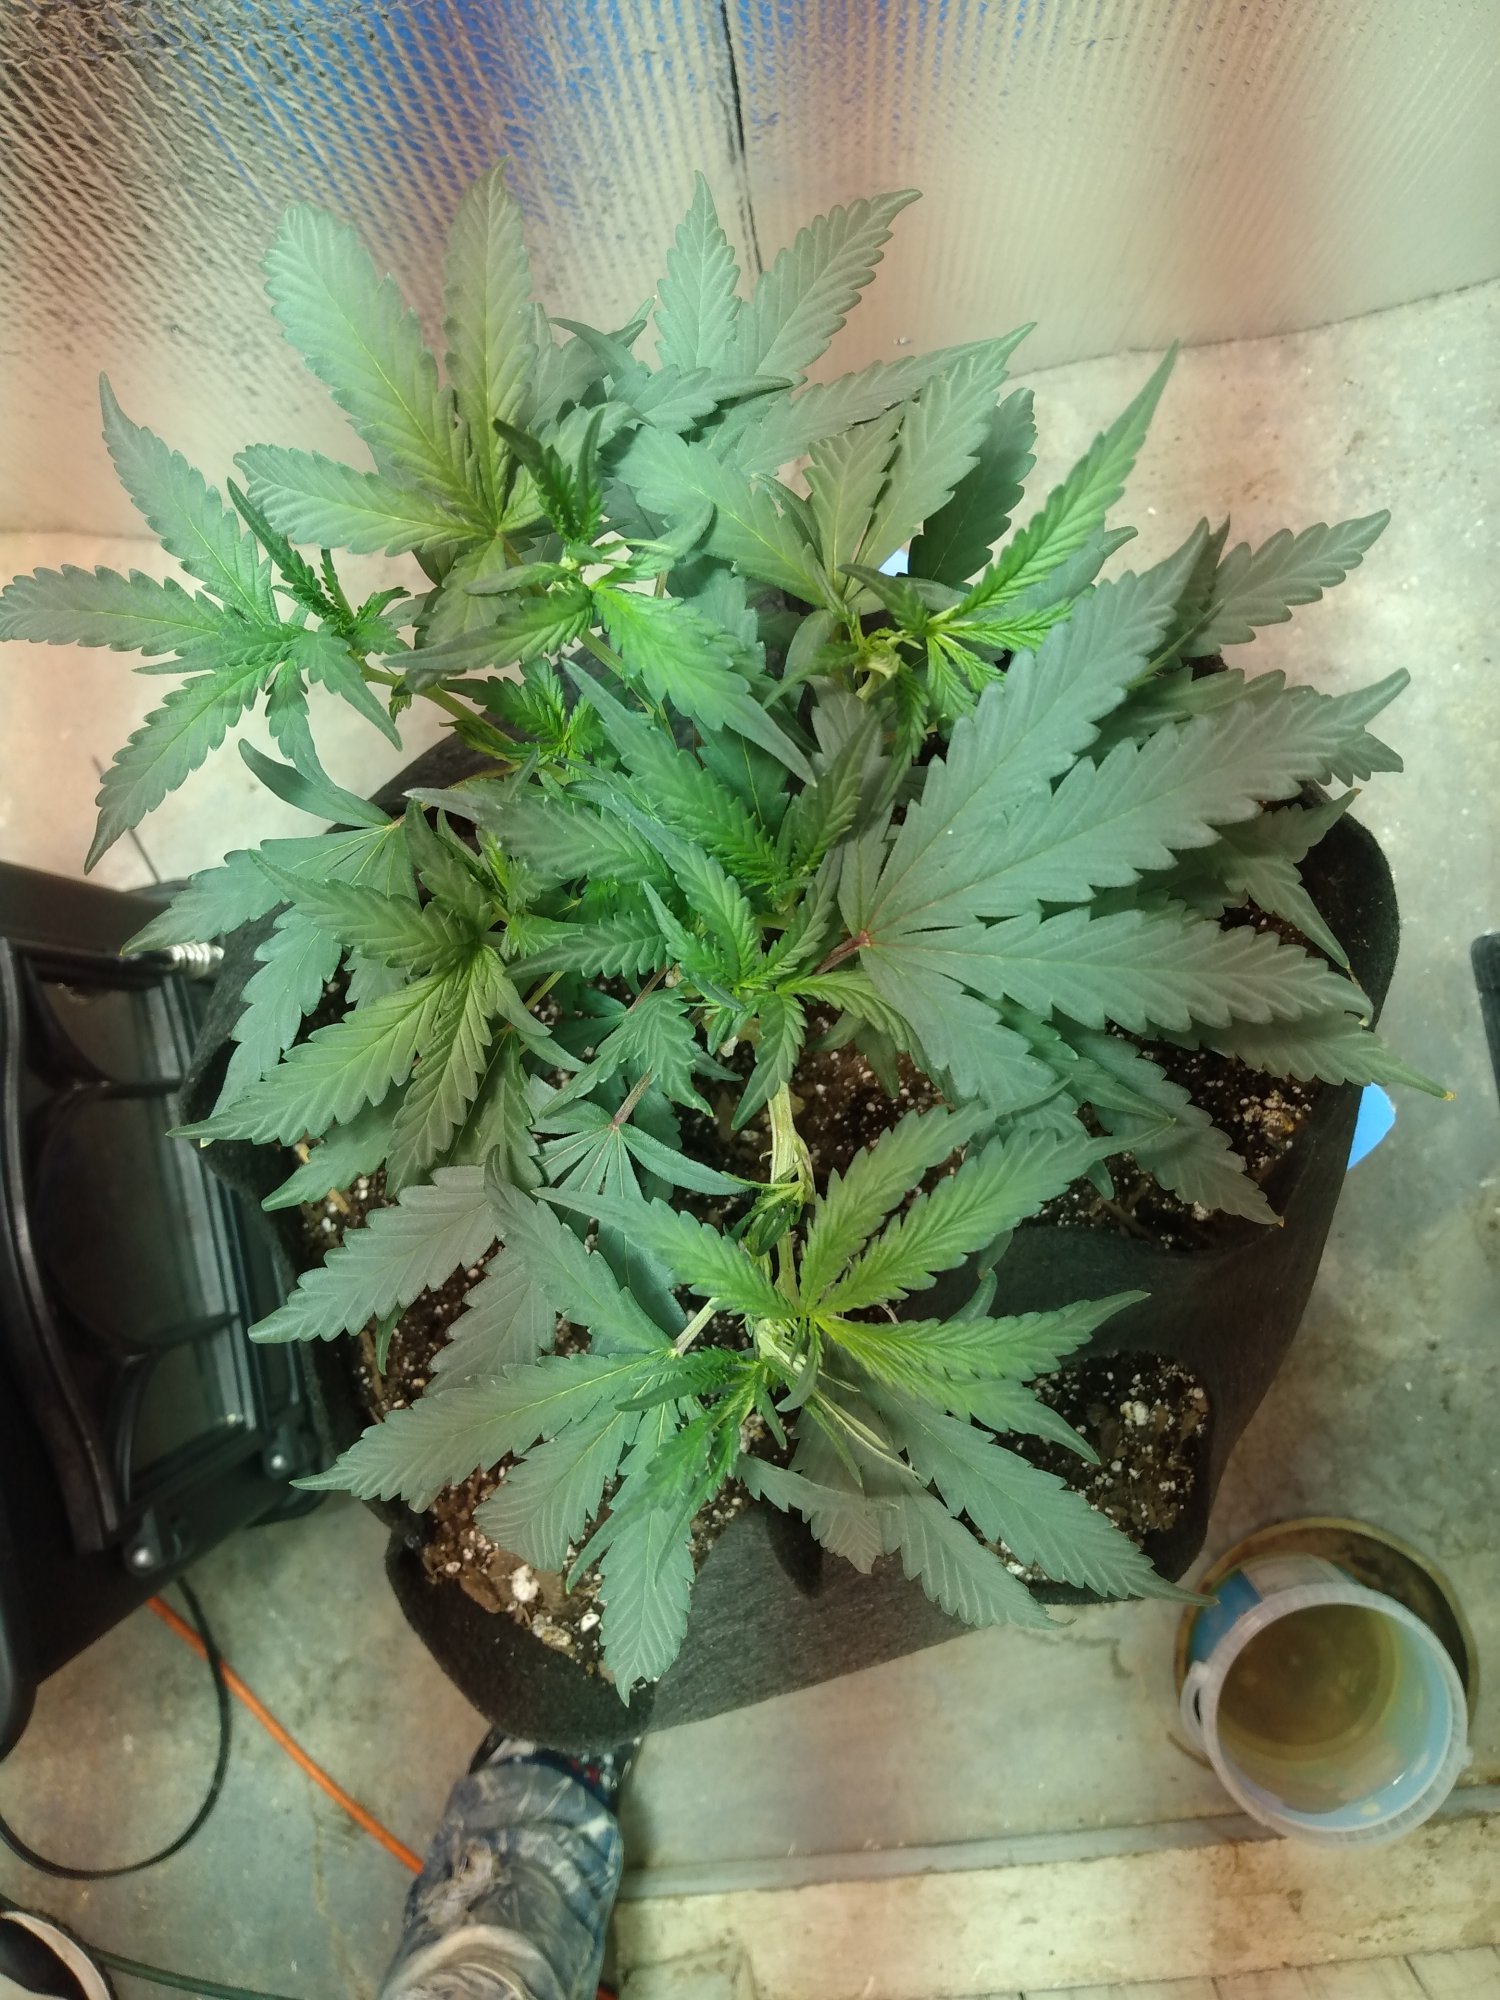 A few basic questions about growing i prefer you guys answer